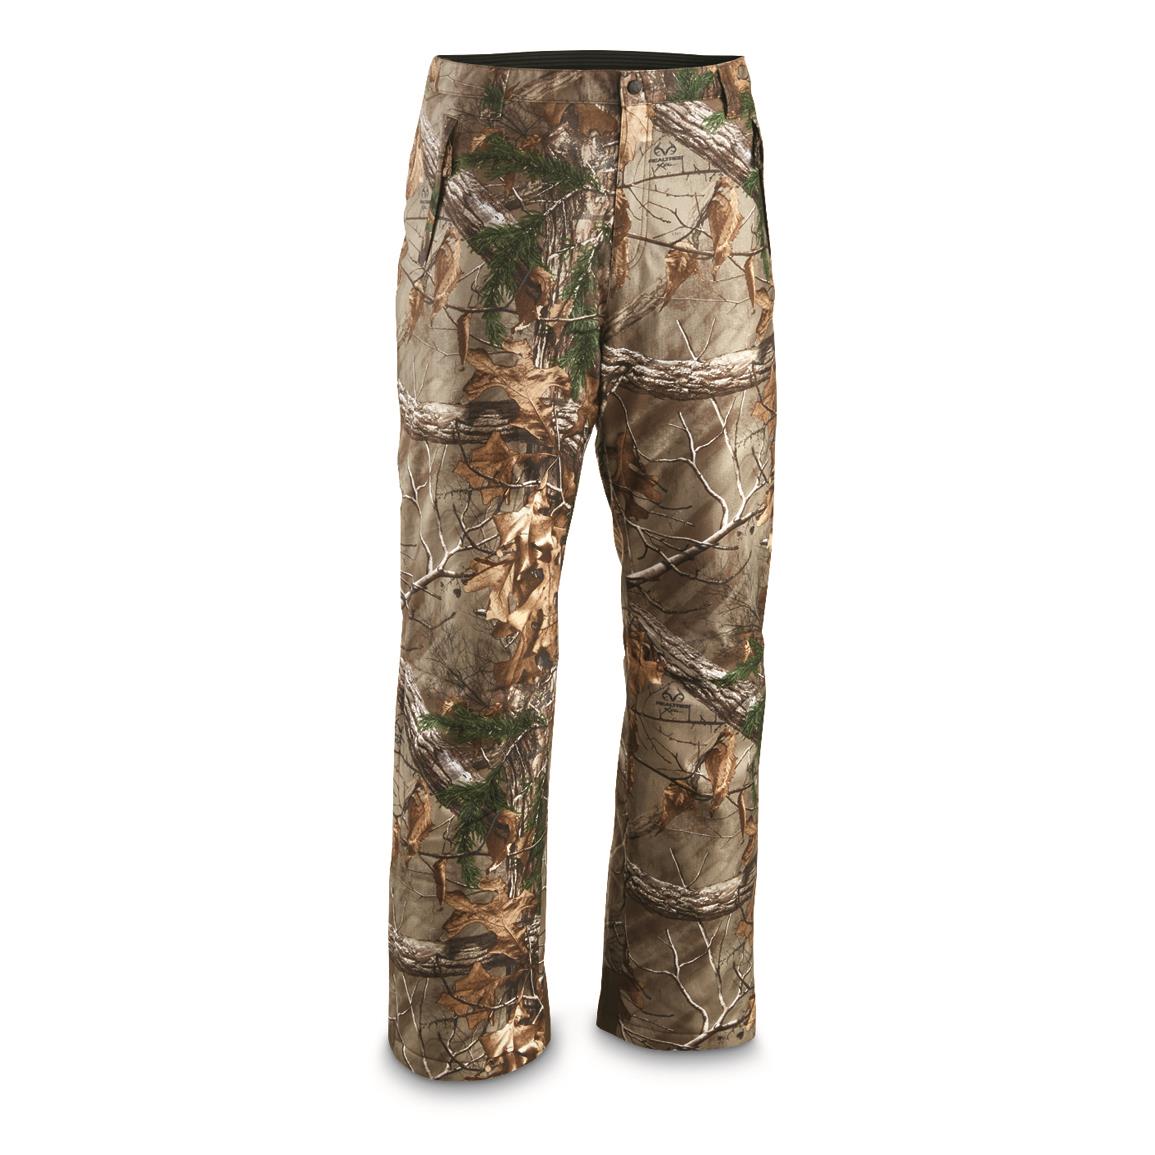 Men's Thinsulate Insulated Camo hunting Water Resistant Pants Realtree Xtra 